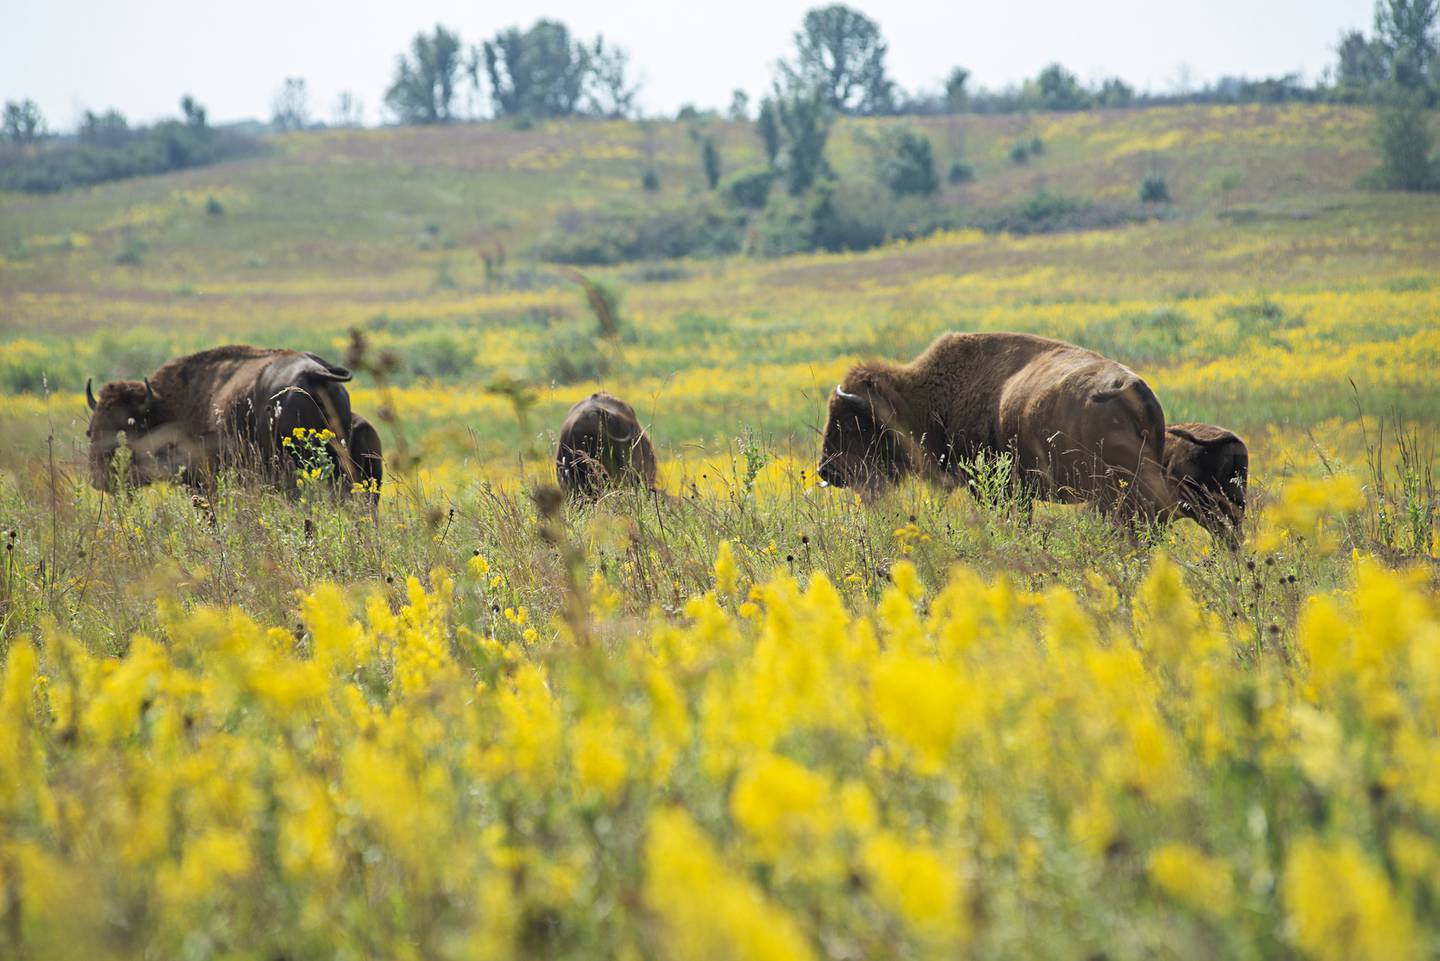 About half the bison herd is seen on a wagon tour through the prairie Saturday at the Nachusa Grasslands.